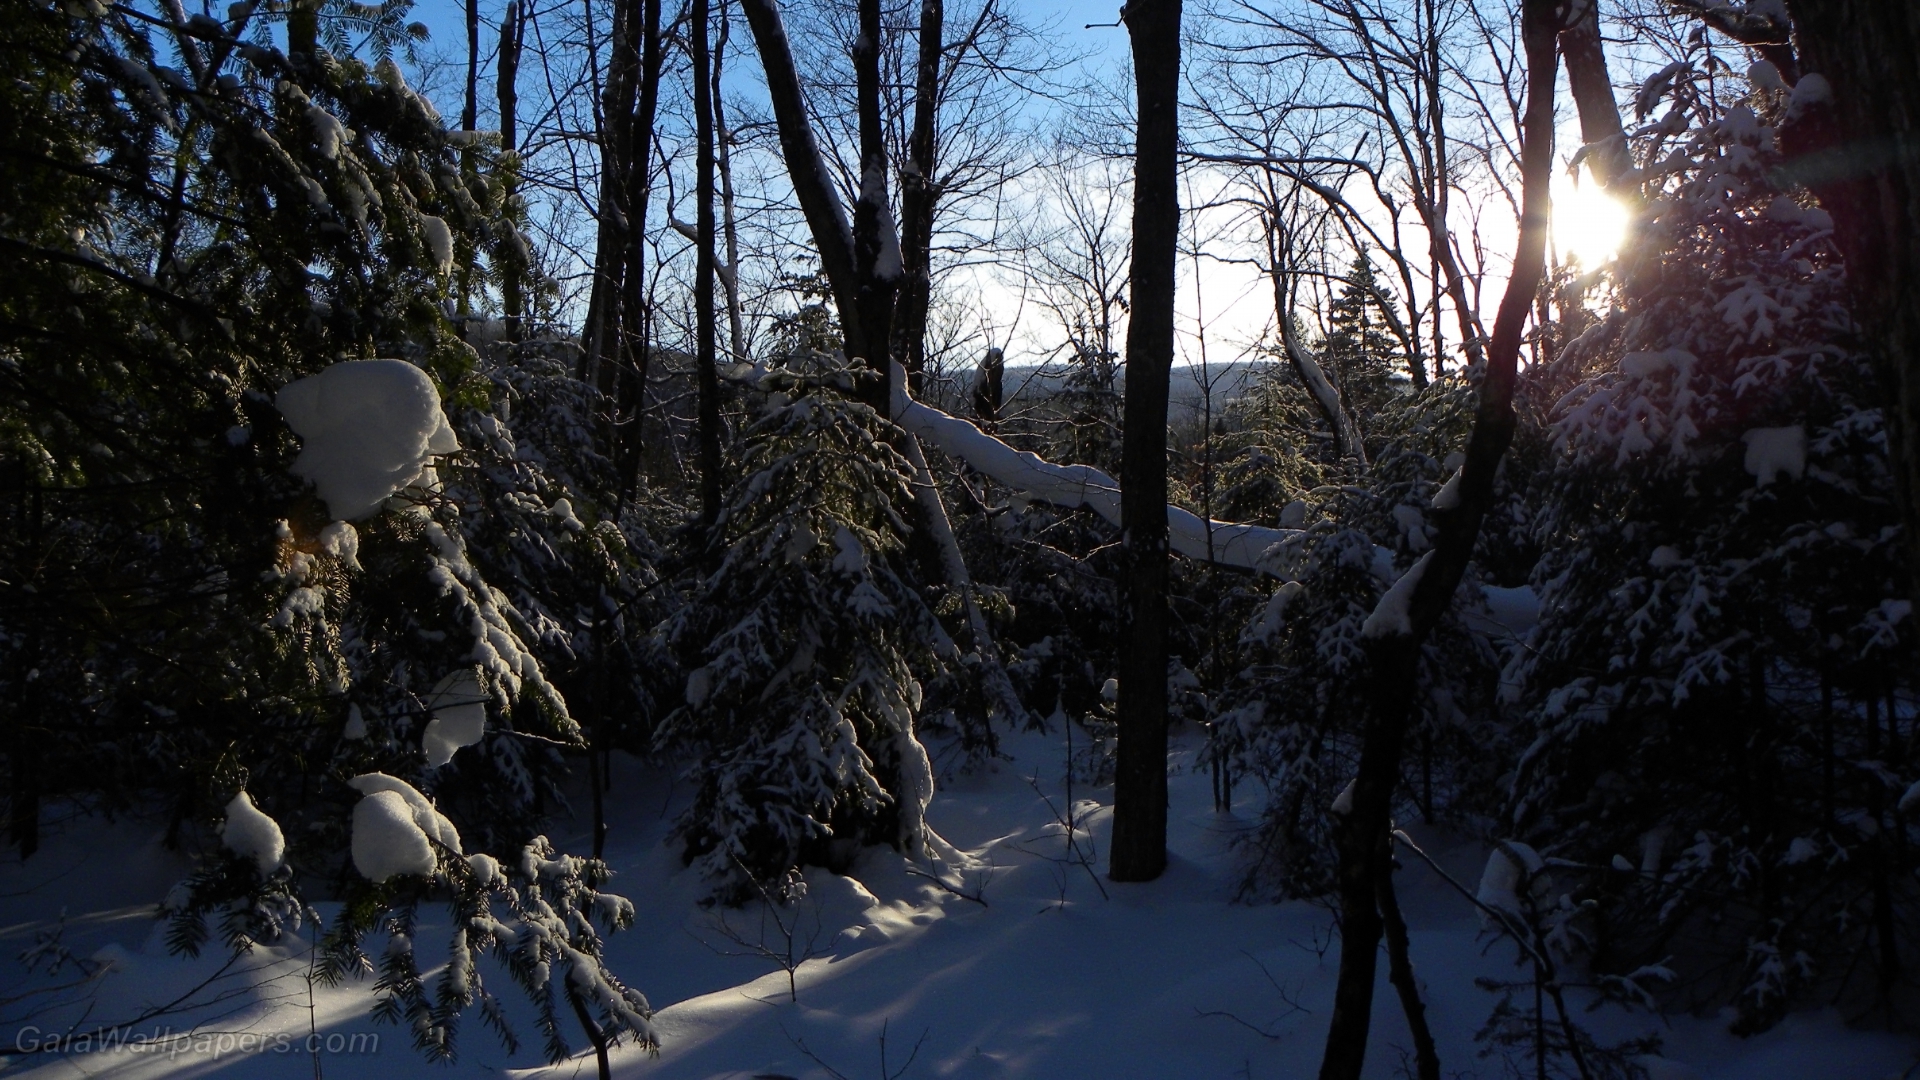 End of a winter's day in the Laurentian Forest - Free desktop wallpapers